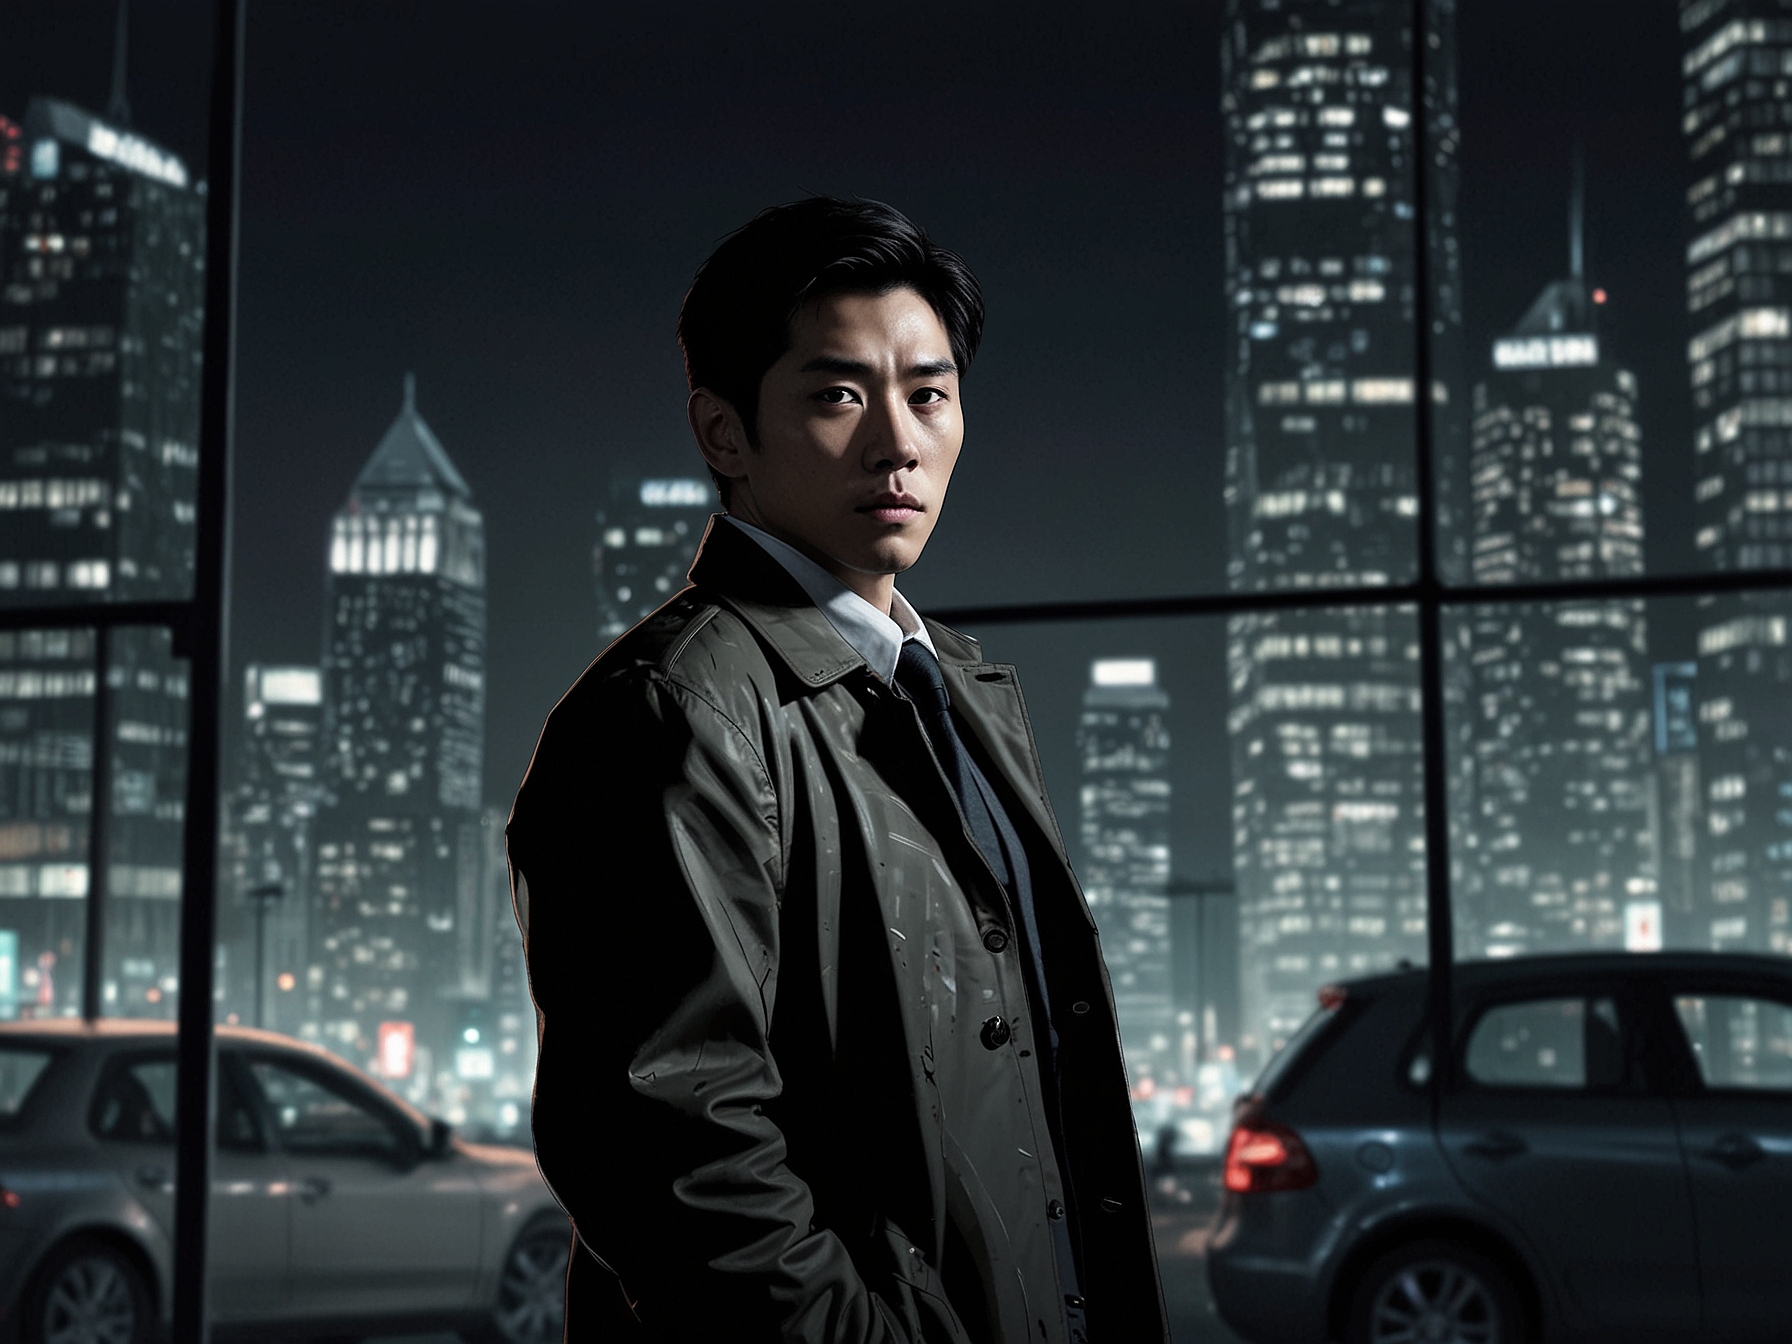 Detective Kang, portrayed by Lee Min-ki, stands amidst an urban landscape illuminated by city lights, reflecting on the deeper themes of justice and corruption explored in 'Crash'.